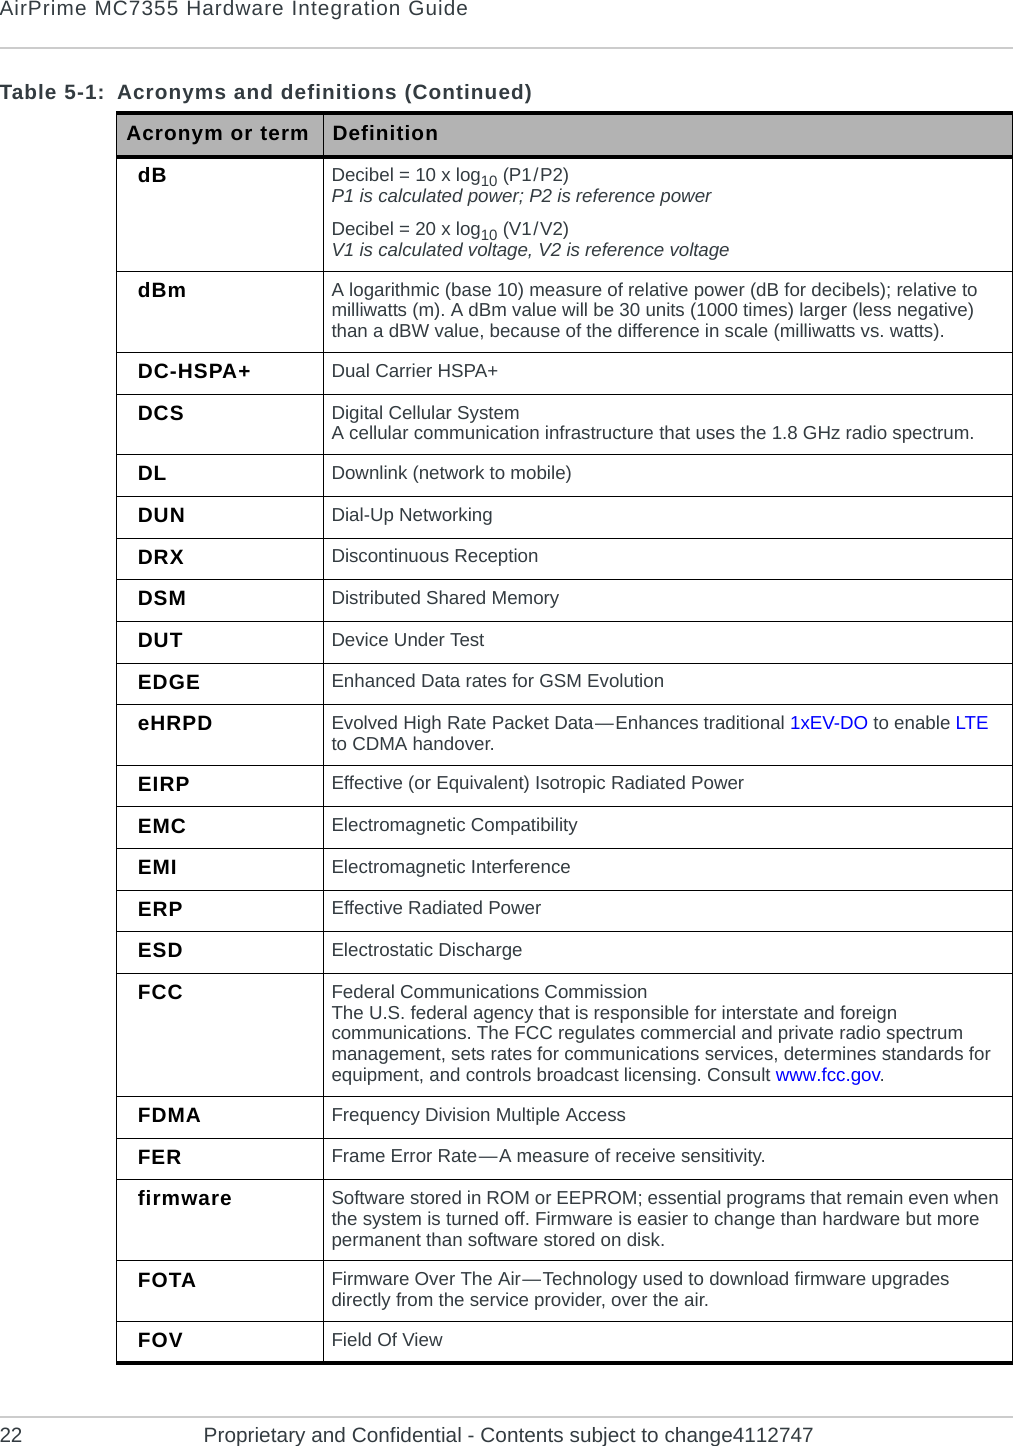 AirPrime MC7355 Hardware Integration Guide22 Proprietary and Confidential - Contents subject to change4112747dB Decibel = 10 x log10 (P1 / P2)P1 is calculated power; P2 is reference powerDecibel = 20 x log10 (V1 / V2)V1 is calculated voltage, V2 is reference voltagedBm A logarithmic (base 10) measure of relative power (dB for decibels); relative to milliwatts (m). A dBm value will be 30 units (1000 times) larger (less negative) than a dBW value, because of the difference in scale (milliwatts vs. watts).DC-HSPA+ Dual Carrier HSPA+DCS Digital Cellular SystemA cellular communication infrastructure that uses the 1.8 GHz radio spectrum.DL Downlink (network to mobile)DUN Dial-Up NetworkingDRX Discontinuous ReceptionDSM Distributed Shared MemoryDUT Device Under TestEDGE Enhanced Data rates for GSM EvolutioneHRPD Evolved High Rate Packet Data — Enhances traditional 1xEV-DO to enable LTE to CDMA handover.EIRP Effective (or Equivalent) Isotropic Radiated PowerEMC Electromagnetic CompatibilityEMI Electromagnetic InterferenceERP Effective Radiated PowerESD Electrostatic DischargeFCC Federal Communications CommissionThe U.S. federal agency that is responsible for interstate and foreign communications. The FCC regulates commercial and private radio spectrum management, sets rates for communications services, determines standards for equipment, and controls broadcast licensing. Consult www.fcc.gov.FDMA Frequency Division Multiple AccessFER Frame Error Rate — A measure of receive sensitivity.firmware Software stored in ROM or EEPROM; essential programs that remain even when the system is turned off. Firmware is easier to change than hardware but more permanent than software stored on disk.FOTA Firmware Over The Air — Technology used to download firmware upgrades directly from the service provider, over the air.FOV Field Of ViewTable 5-1:  Acronyms and definitions (Continued)Acronym or term Definition